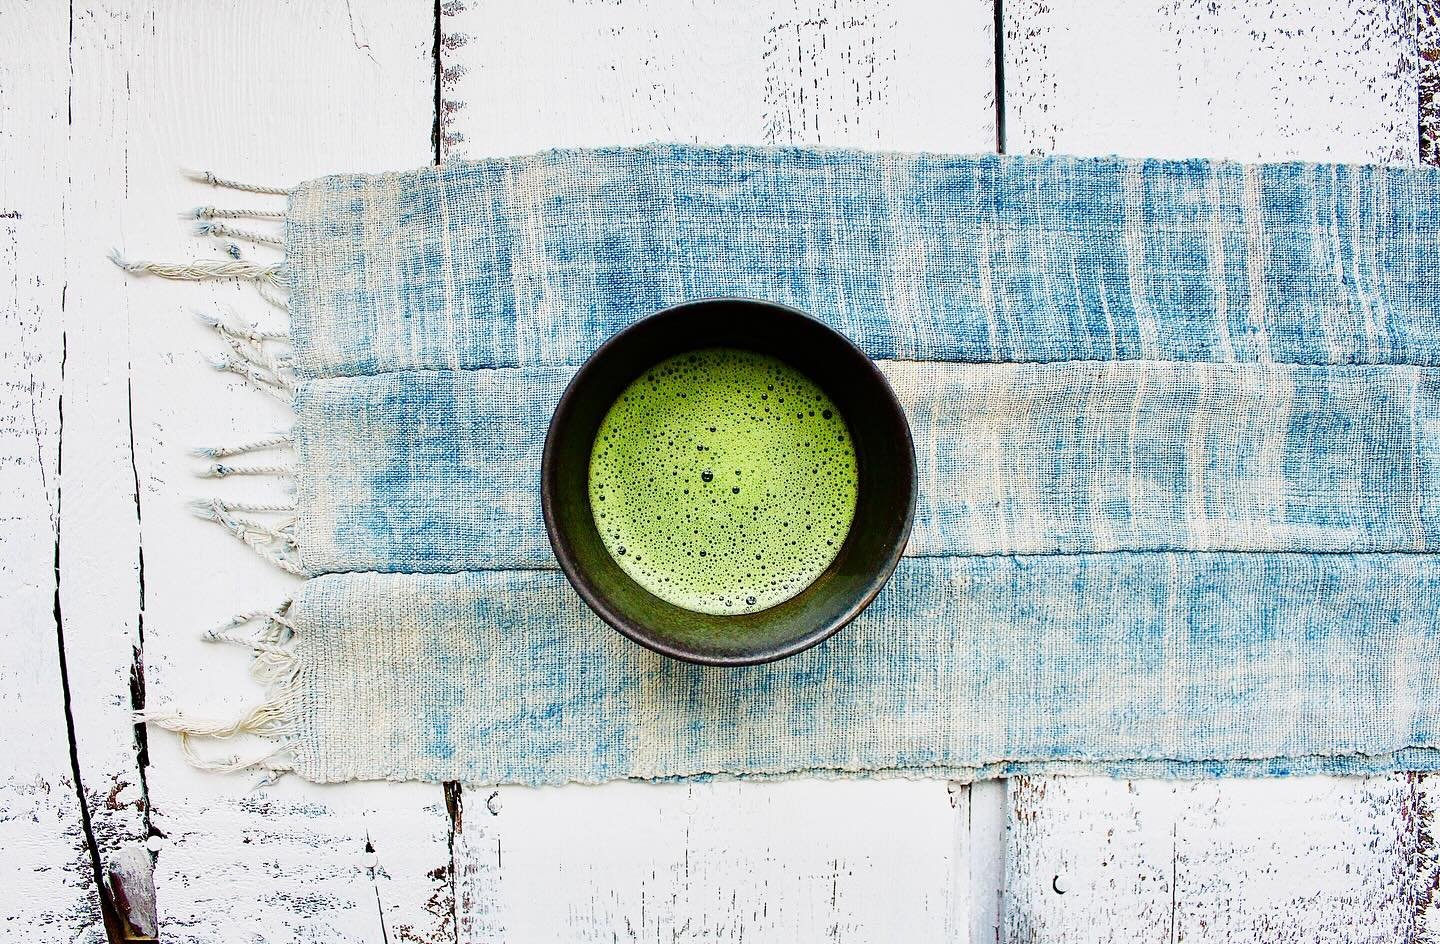 &bull;
If you&rsquo;ve been around The Mending Space for any length of time, you know how much I love matcha tea. For nearly two decades, this elixir has been a faithful companion and generous support to my healing and well-being.

But more than the 